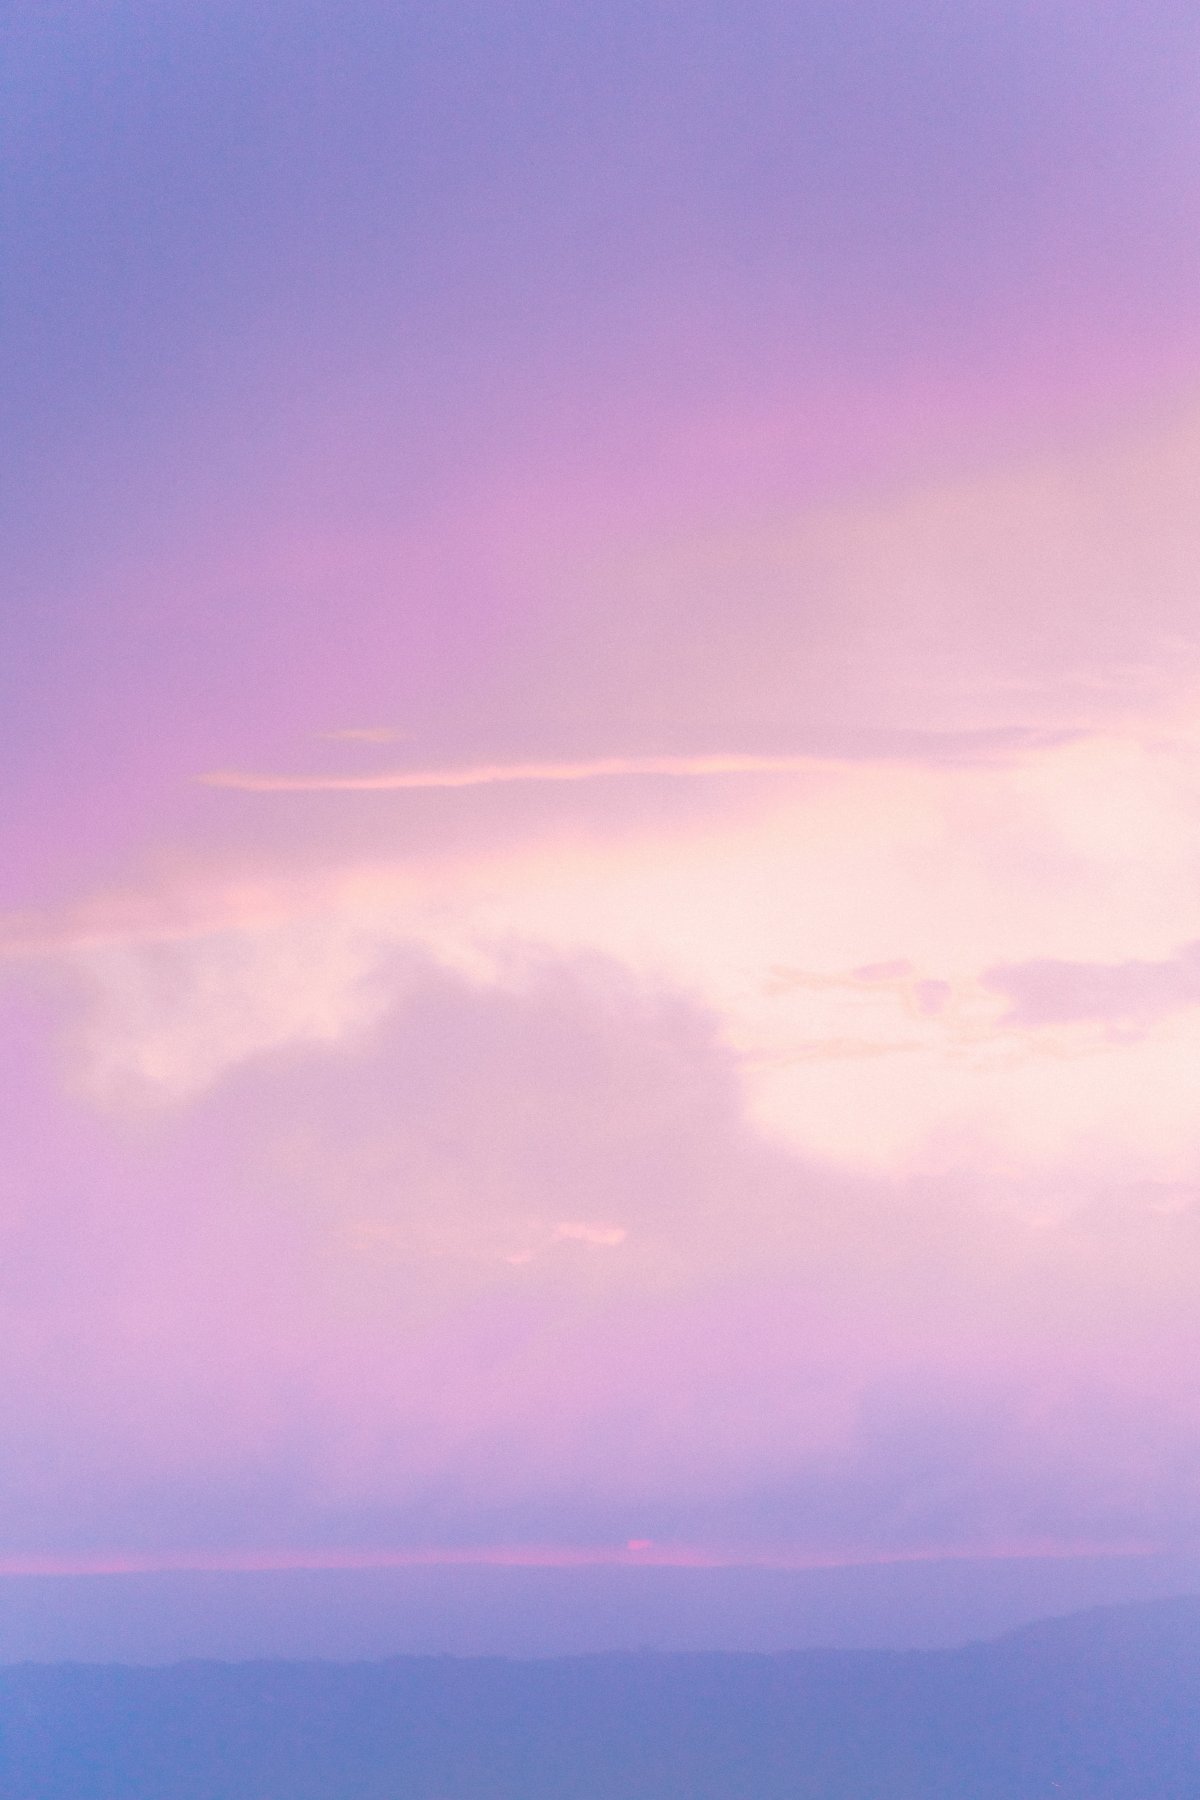 Beautiful scenery picture of pink and purple sky